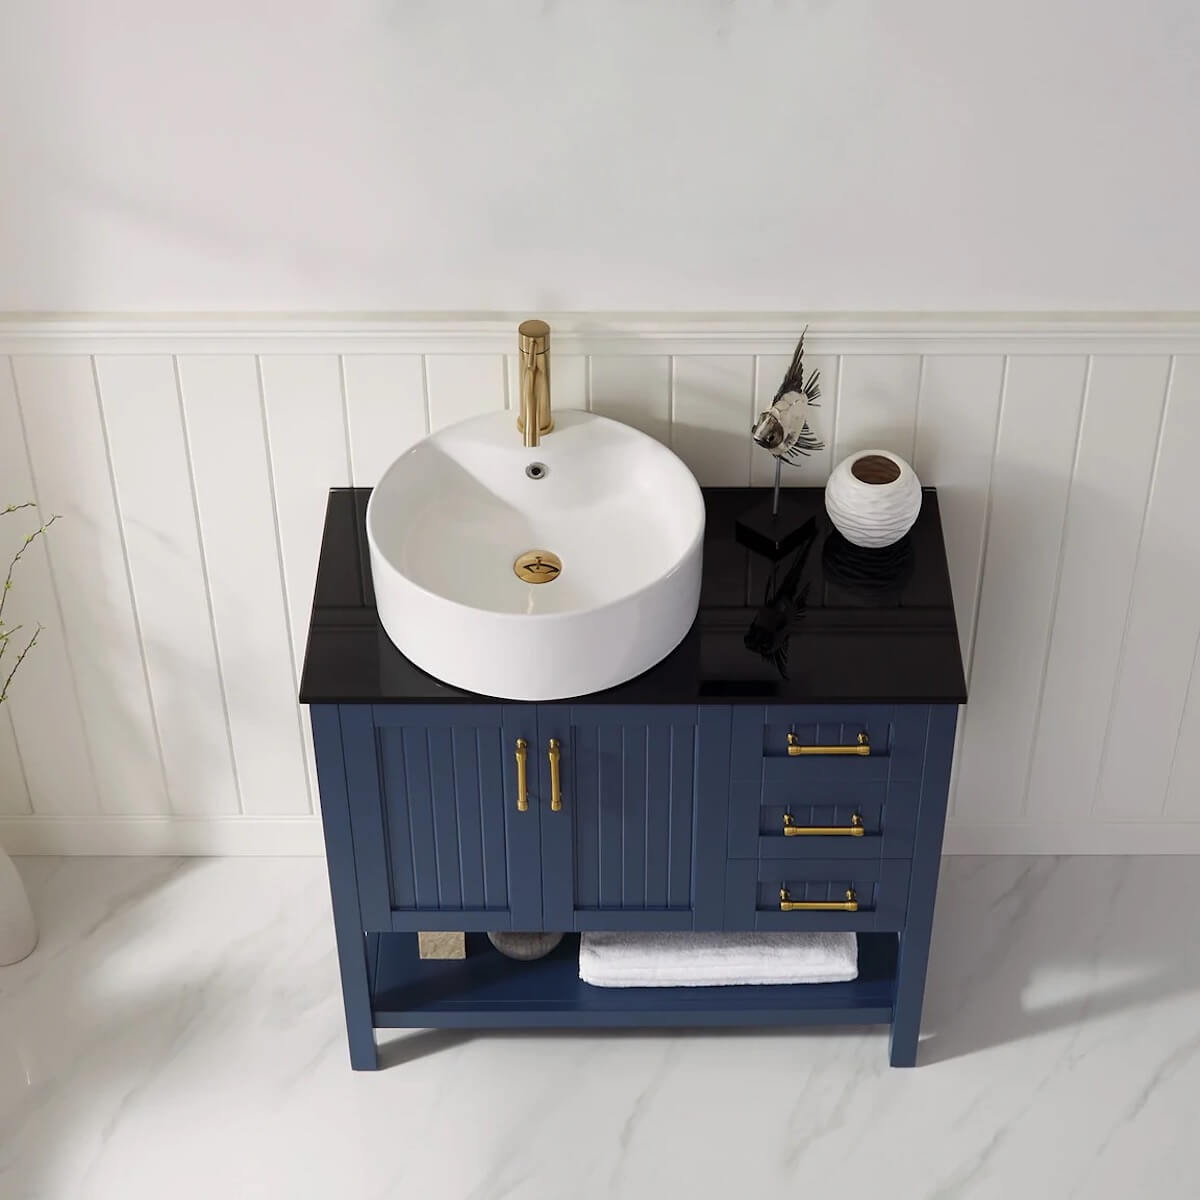  Vinnova Modena 36 Inch Royal Blue Freestanding Single Vanity with Glass Countertop and White Vessel Sink Without Mirror Counter 756036-RB-BG-NM